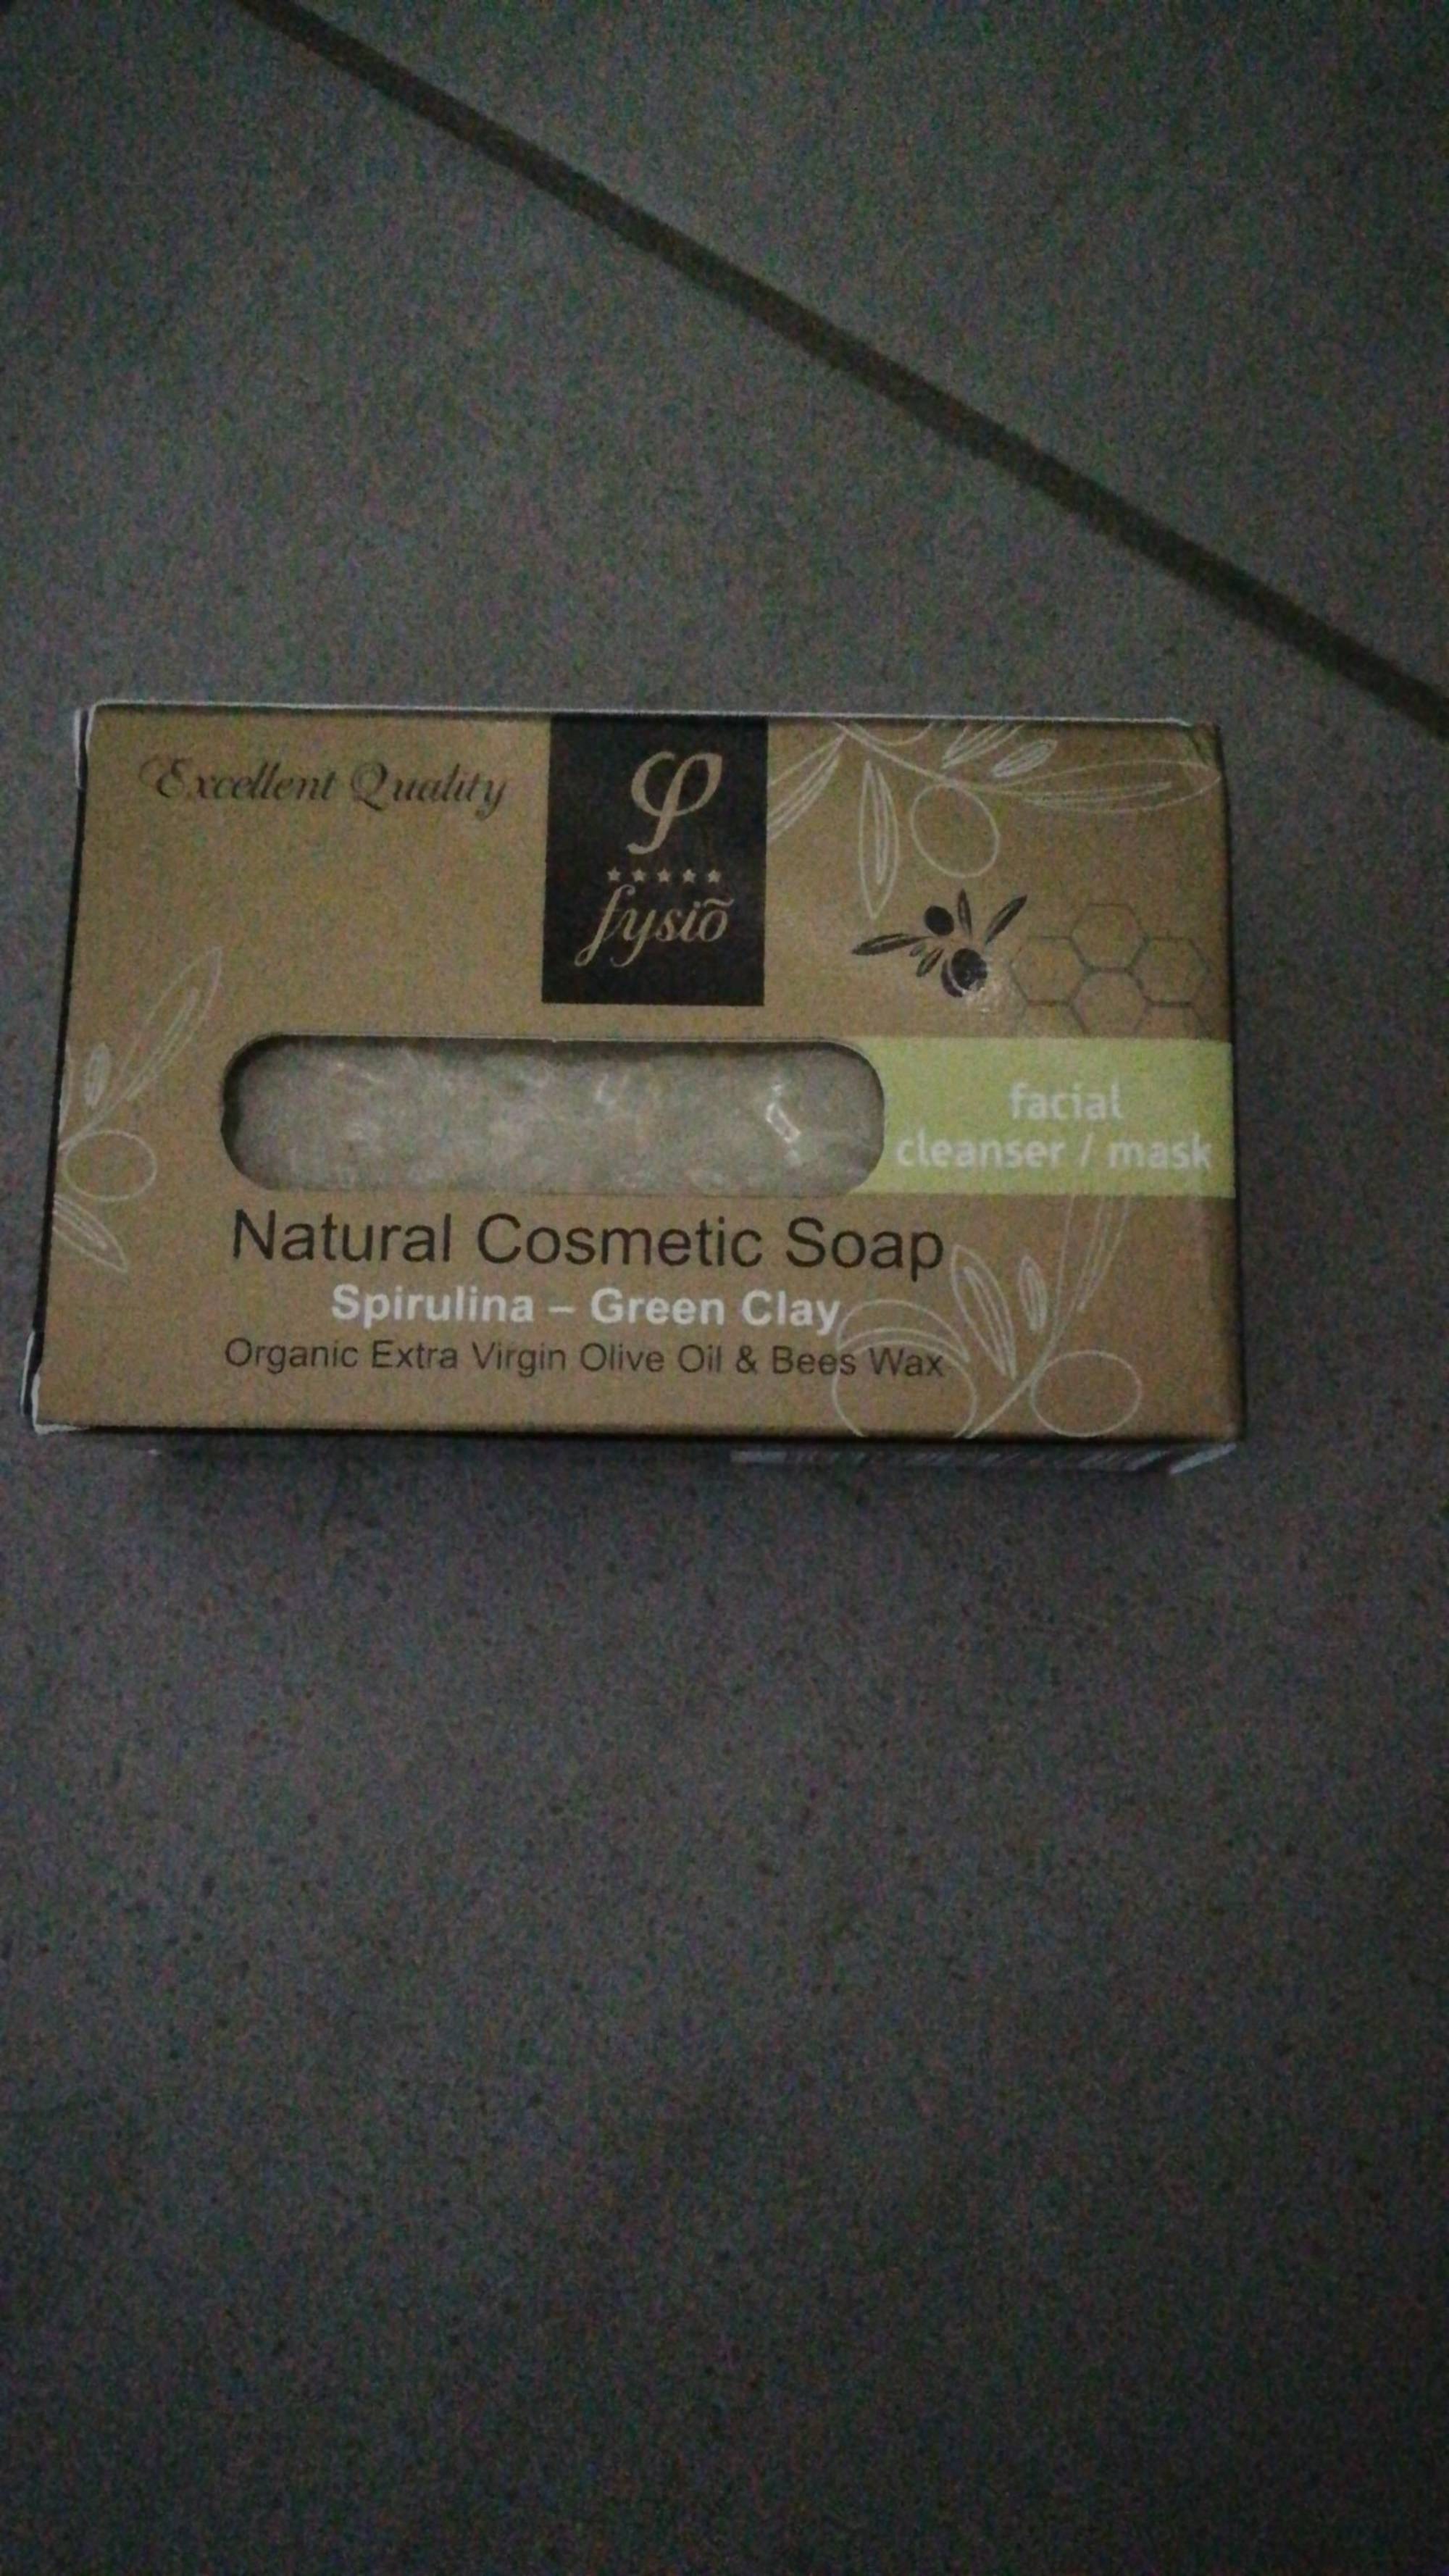 FYSIO - Natural cosmetic soap